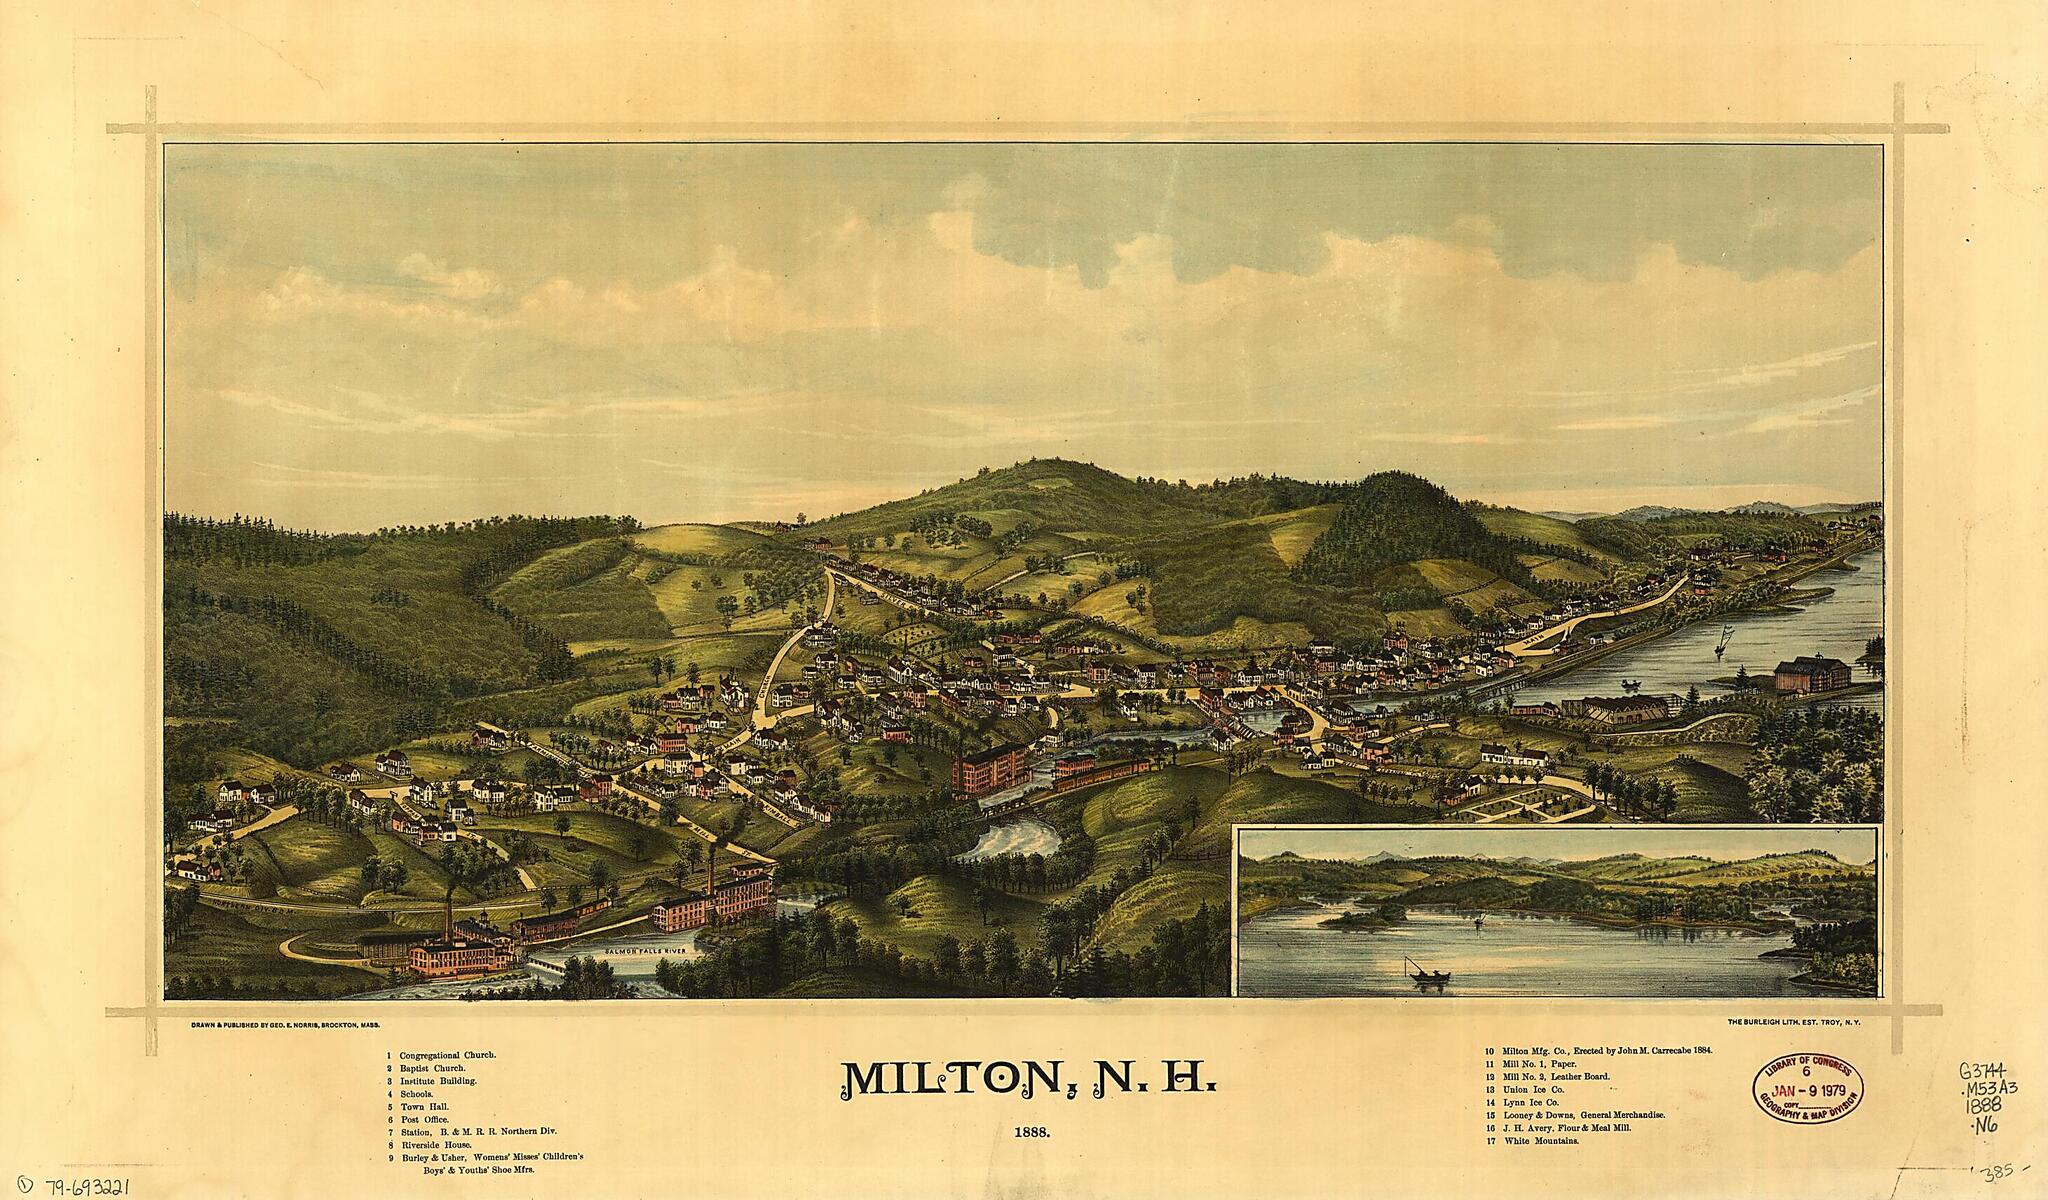 This old map of Milton, New Hampshire, from 1888 was created by  Burleigh Litho, George E. Norris in 1888